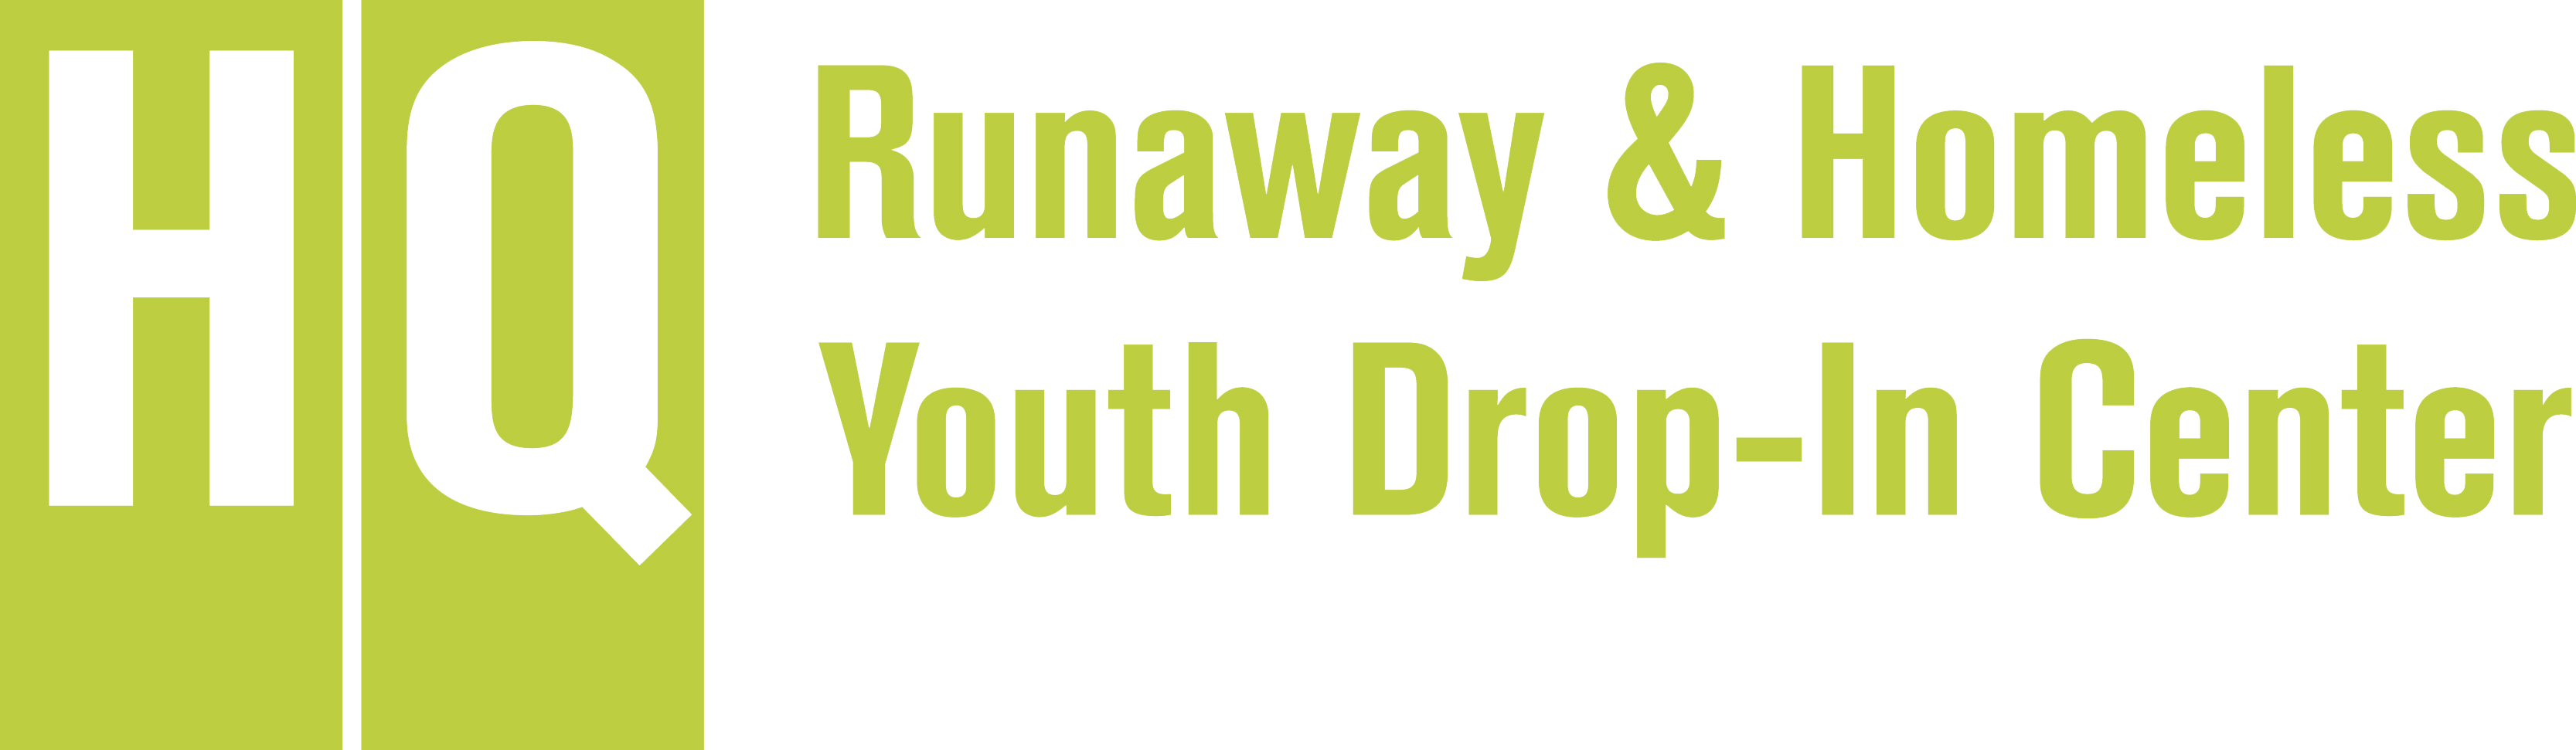 HQ Logo - HQ Runaway & Homeless Youth Drop-In Center - Runaway and Homeless ...